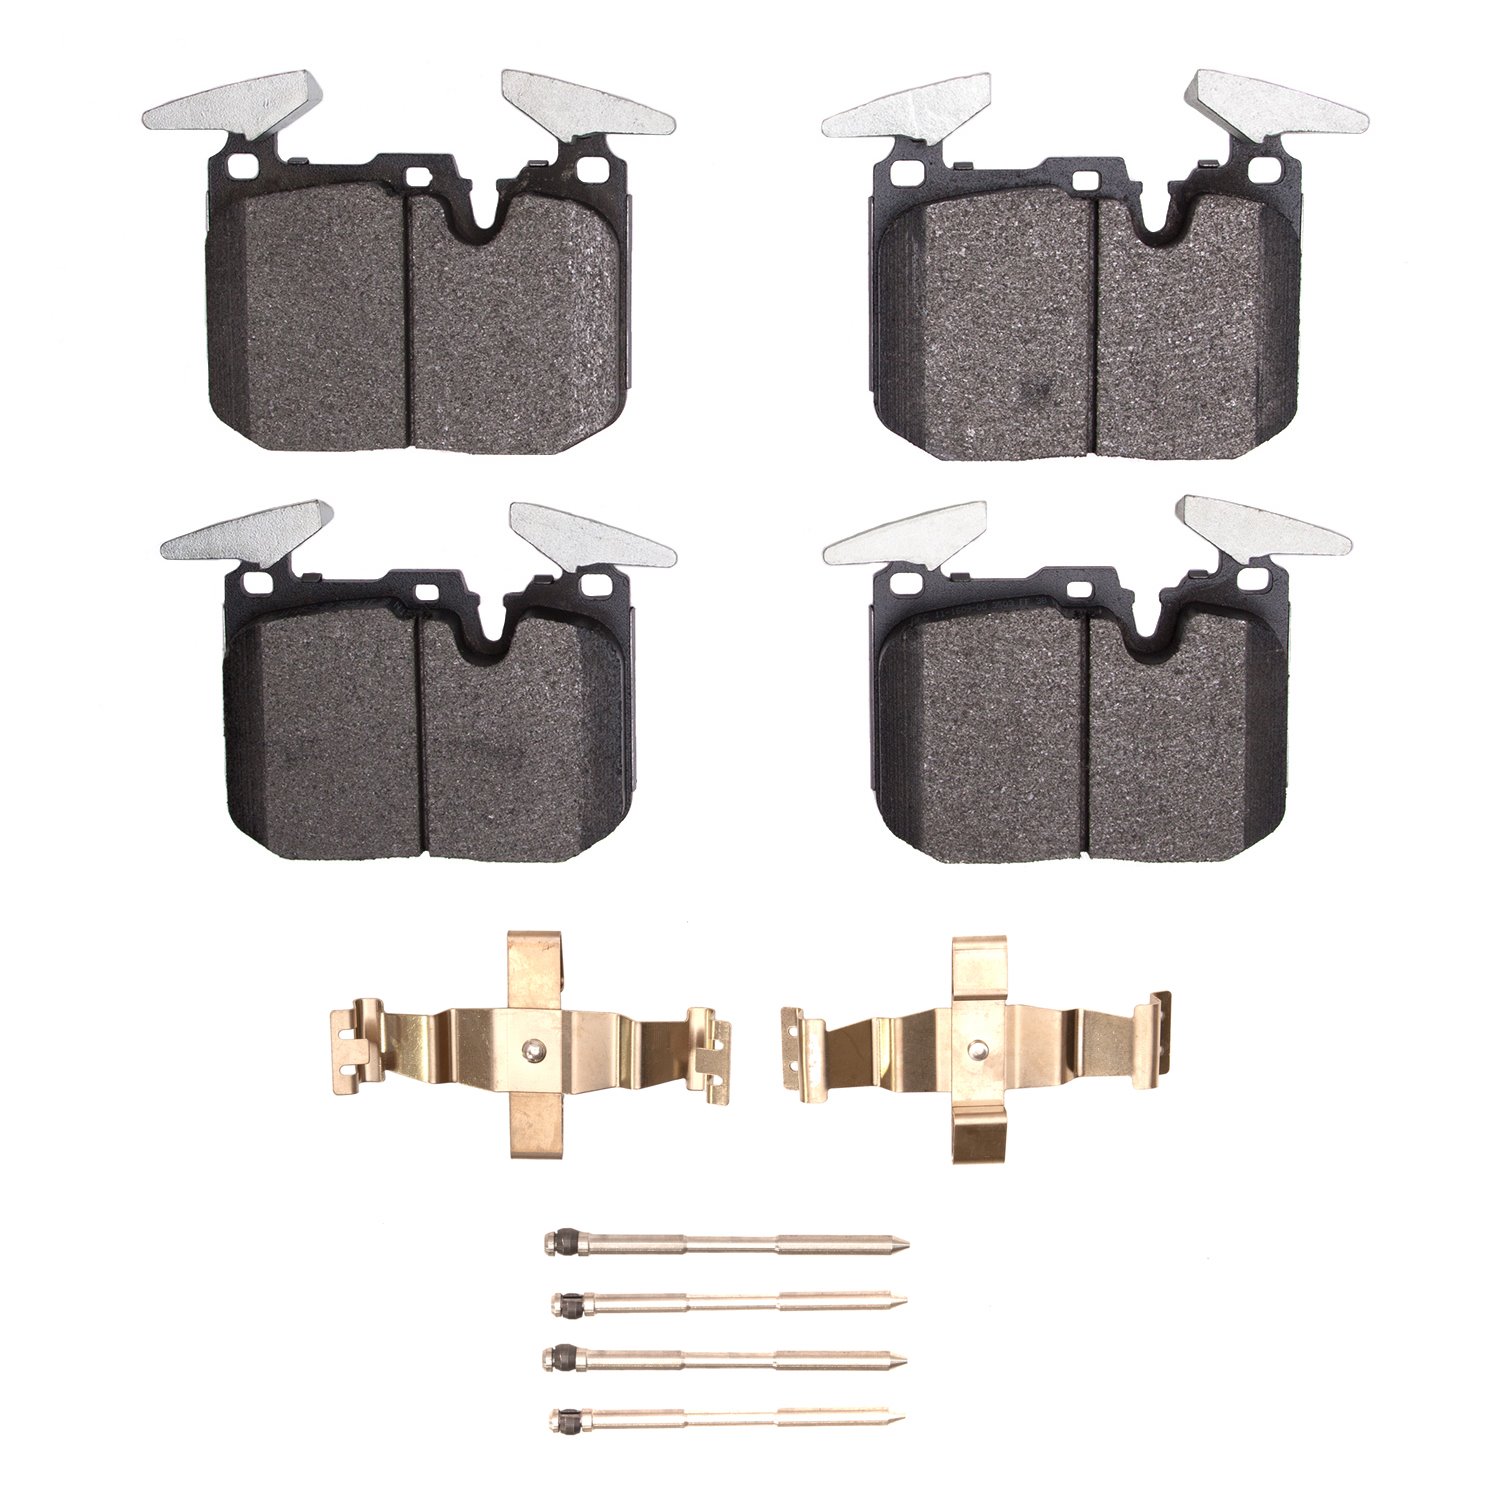 1551-1609-21 5000 Advanced Low-Metallic Brake Pads & Hardware Kit, Fits Select Multiple Makes/Models, Position: Front